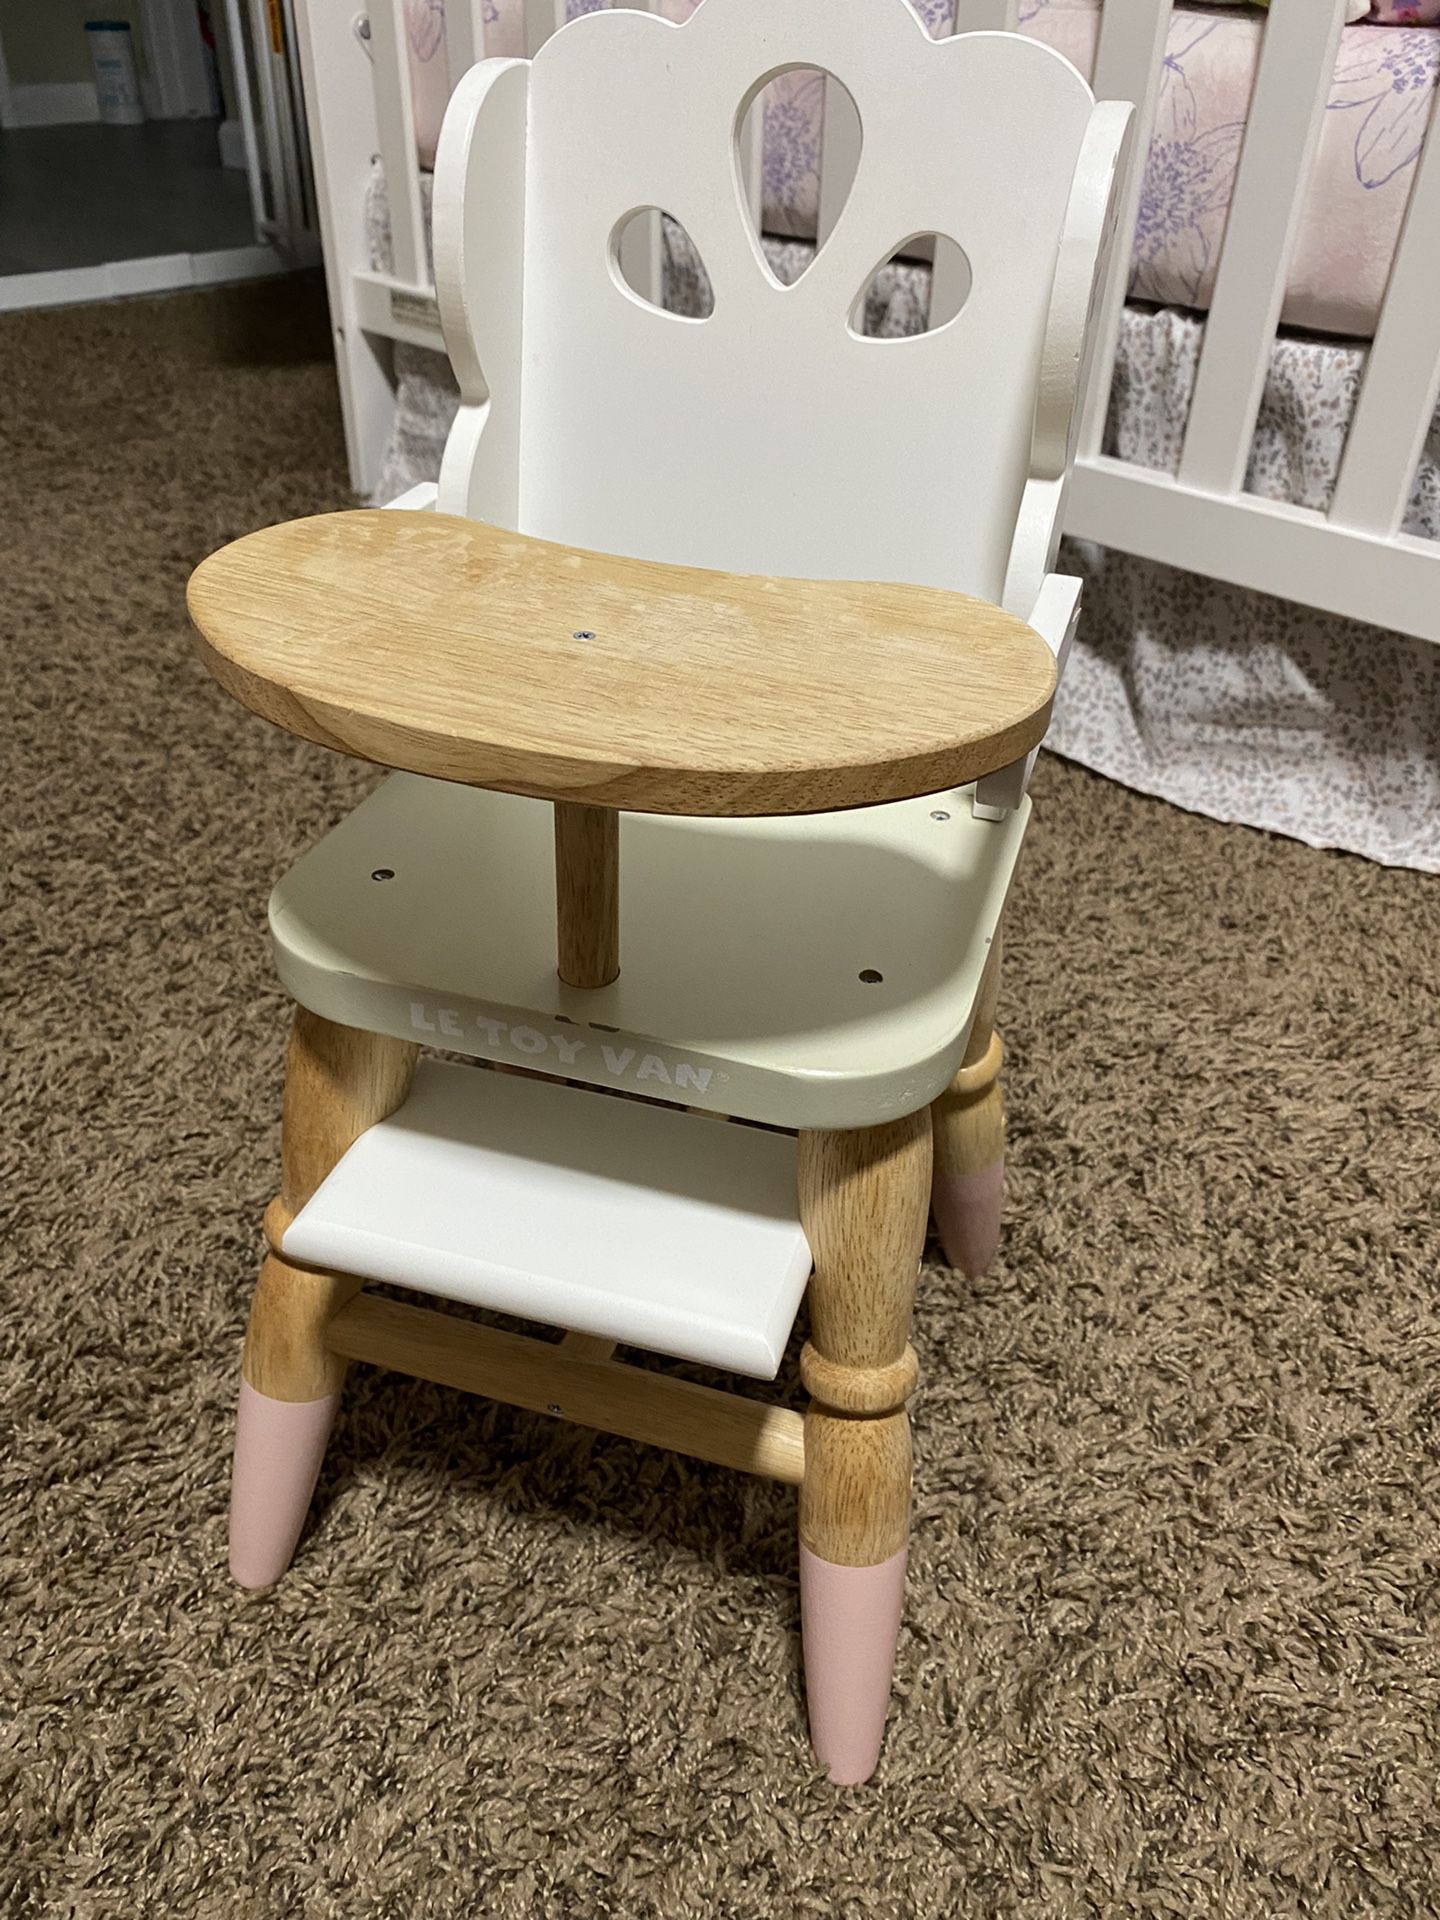 Le Toy Van Wooden High Chair Toy